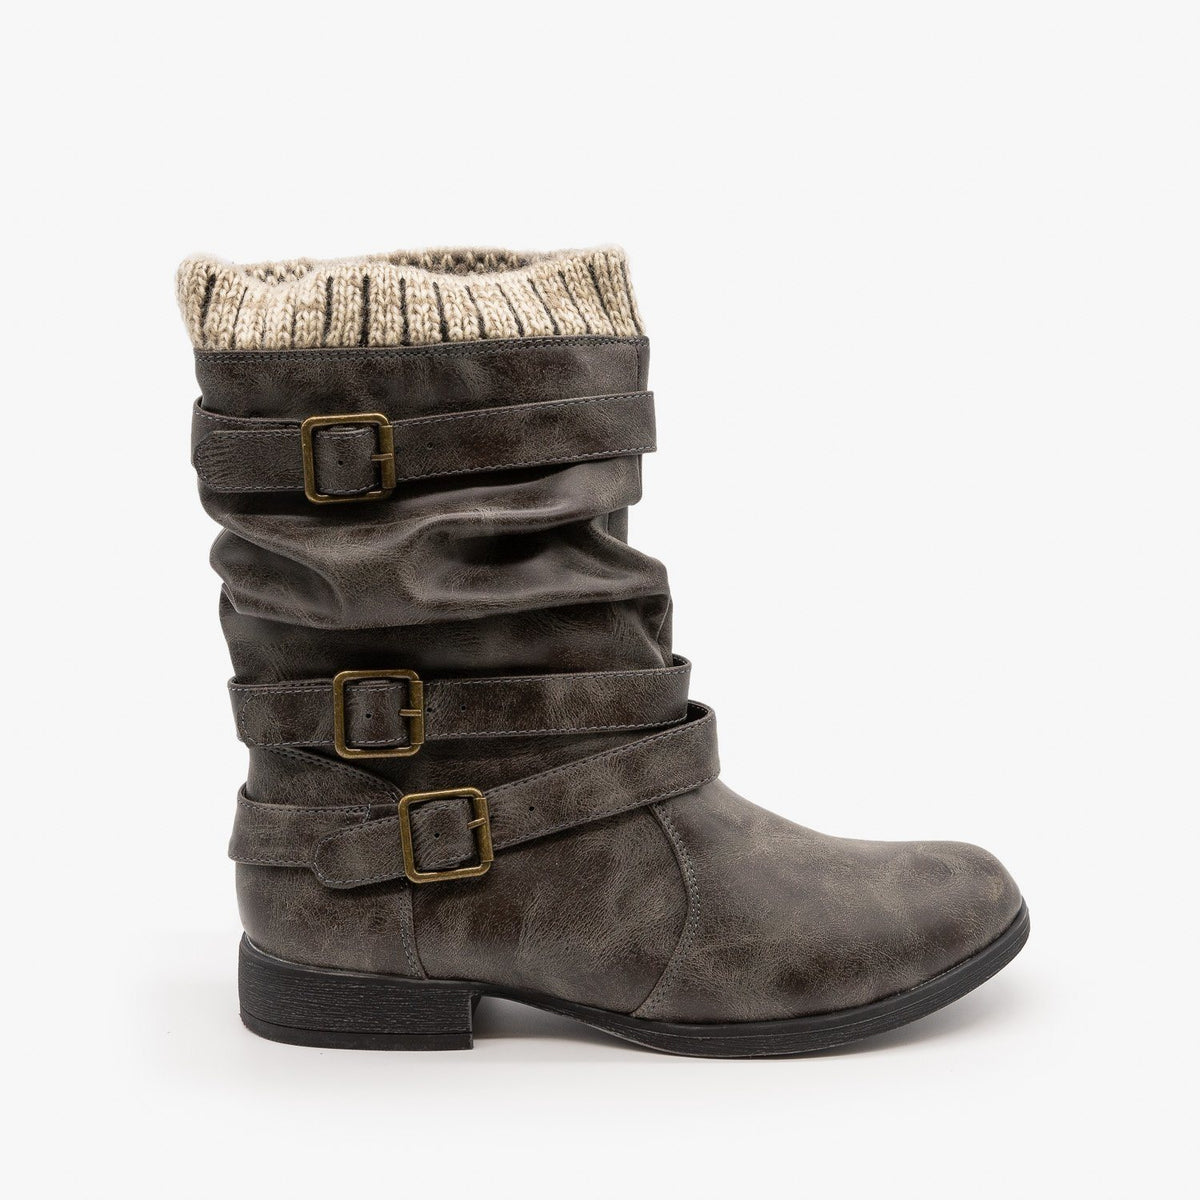 booties with buckles